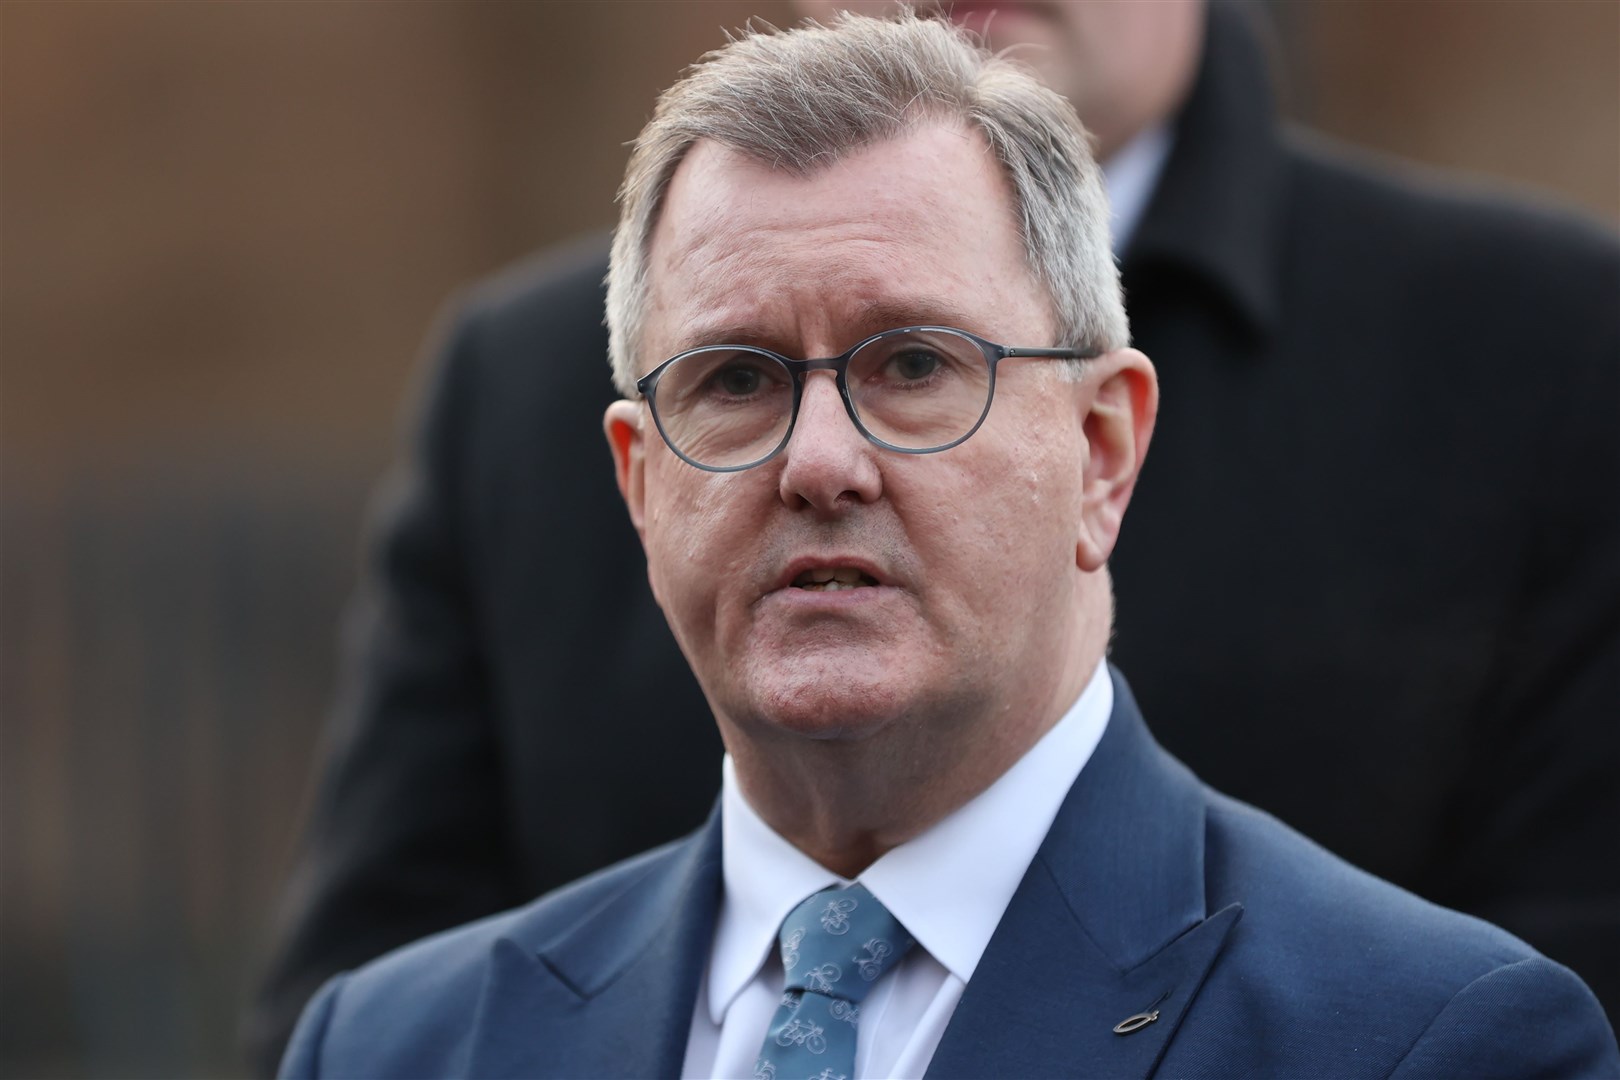 DUP leader Sir Jeffrey Donaldson said he ‘will not be intimidated or distracted’ (Liam McBurney/PA)